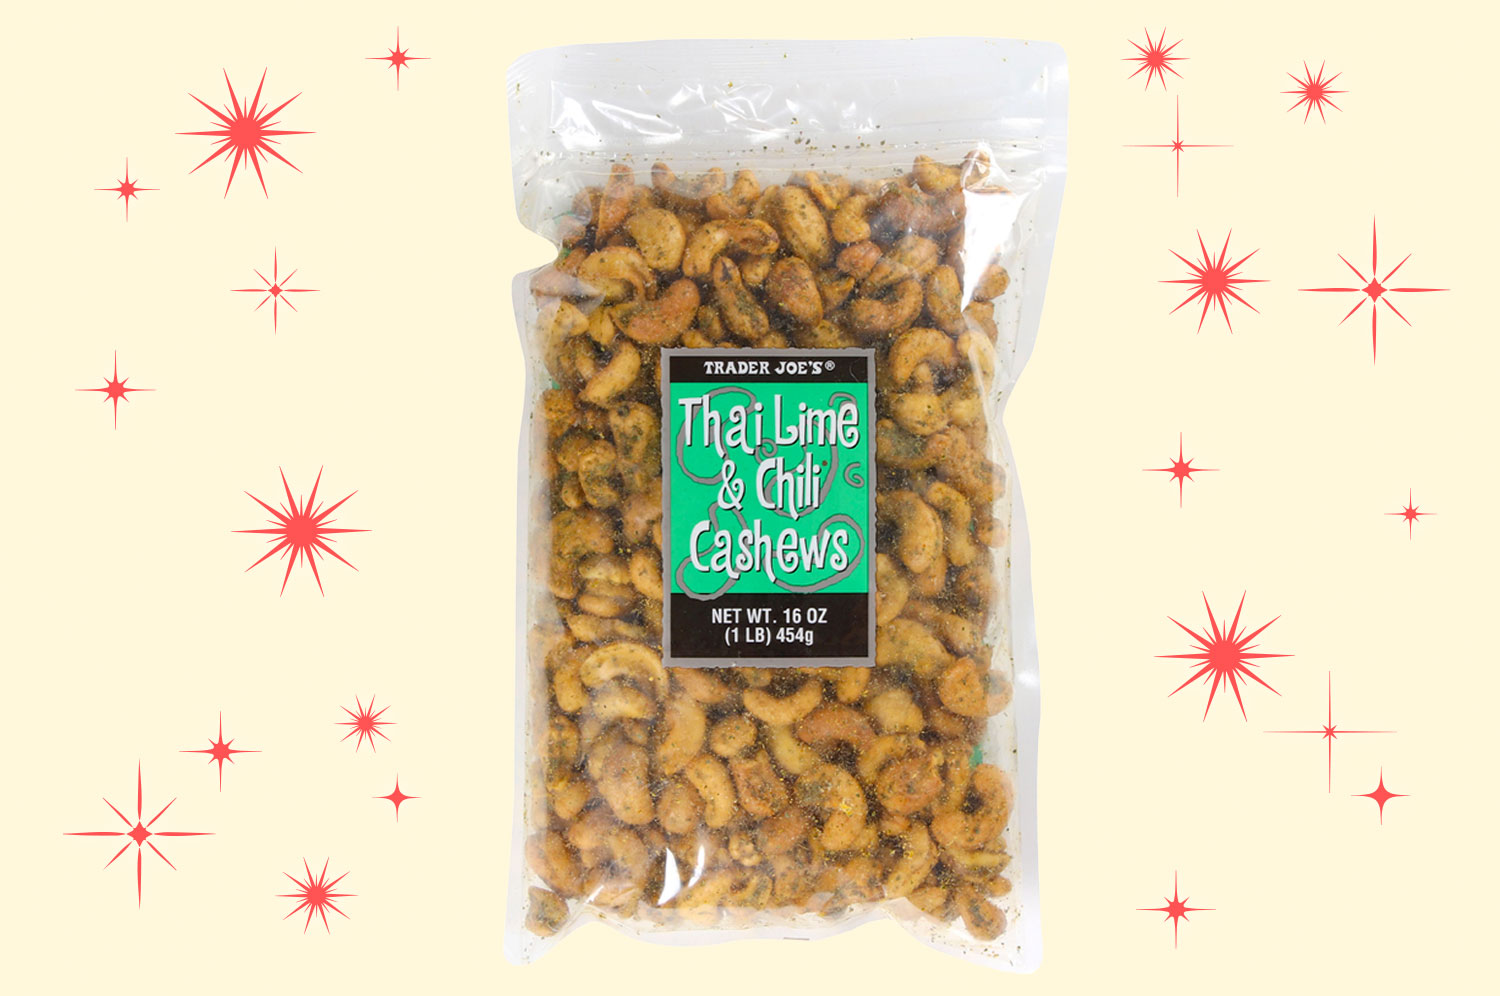 Photo of a package of Thai Lime and Chili Cashews on a starry backdrop.